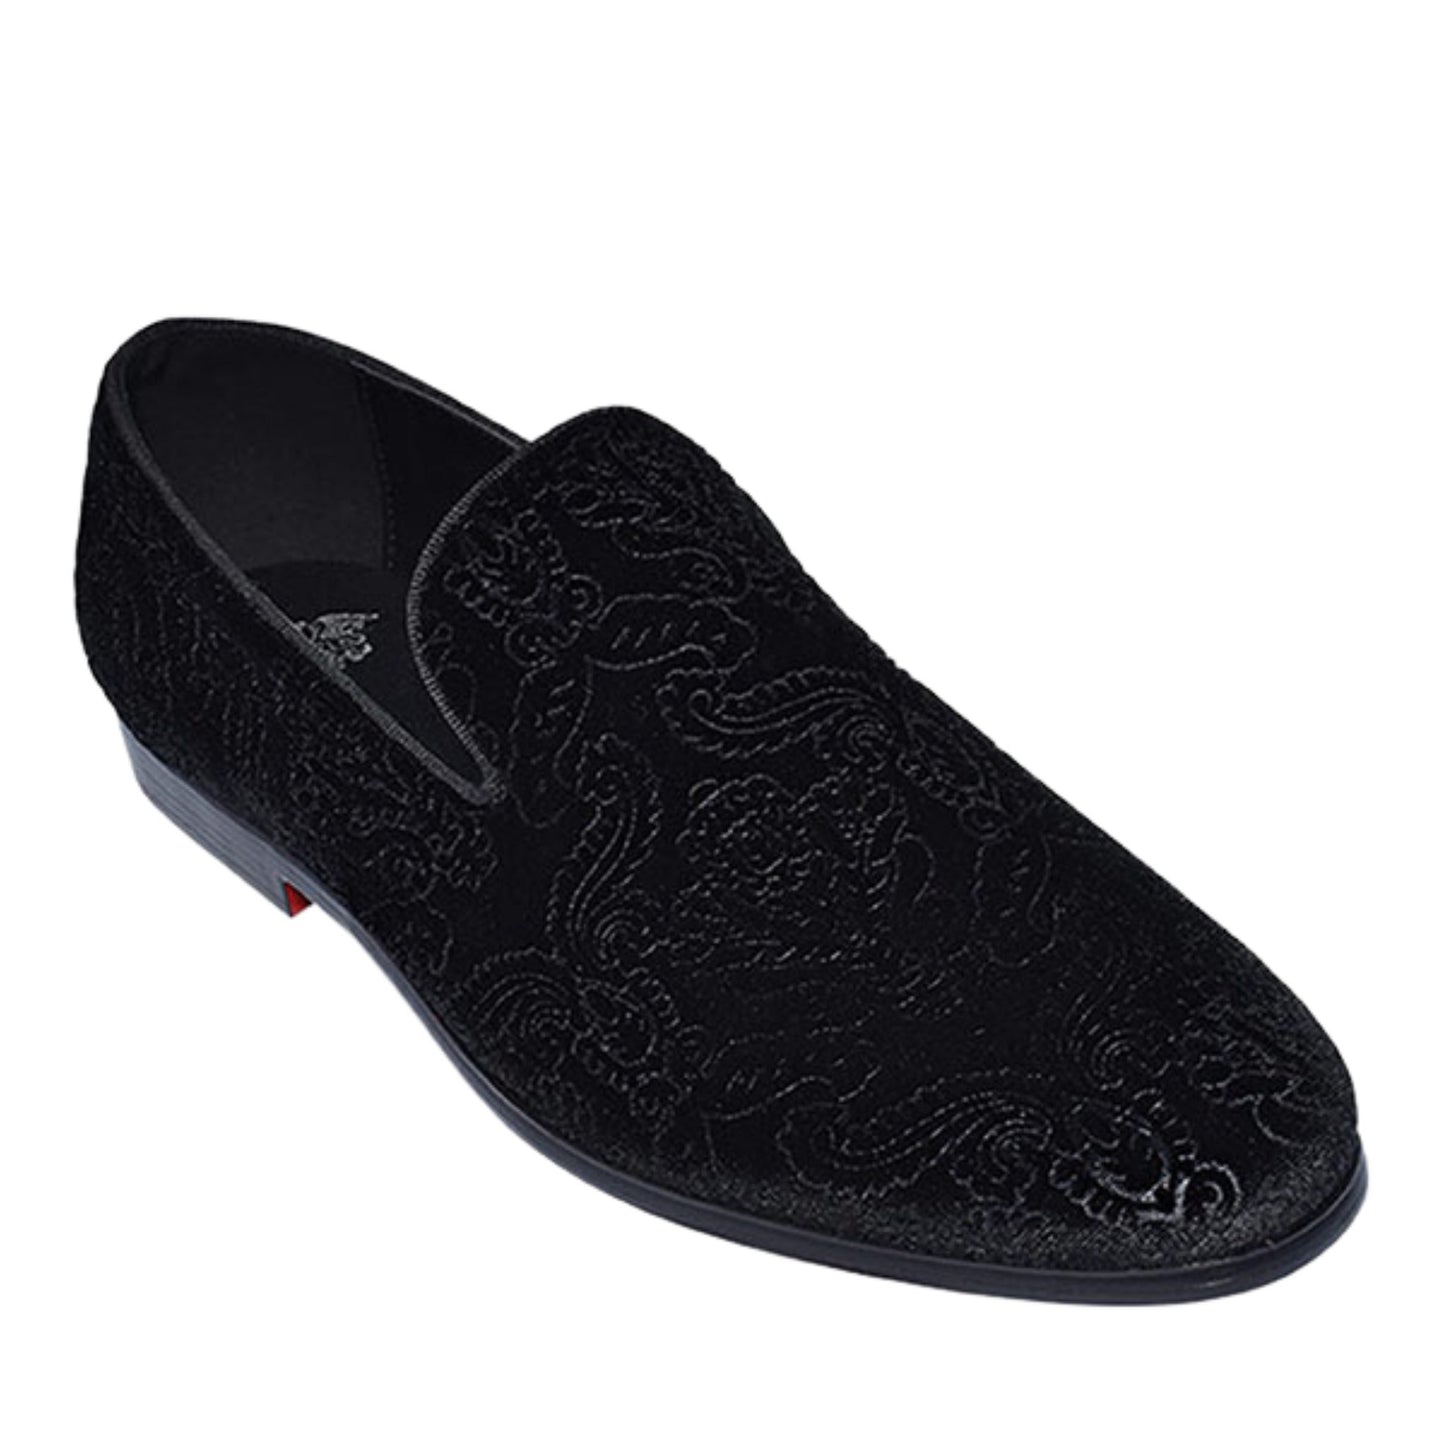 Elegant man wearing KCT Menswear's Black Velvet Paisley Loafer, showcasing a fashionable and unique footwear option for any stylish ensemble